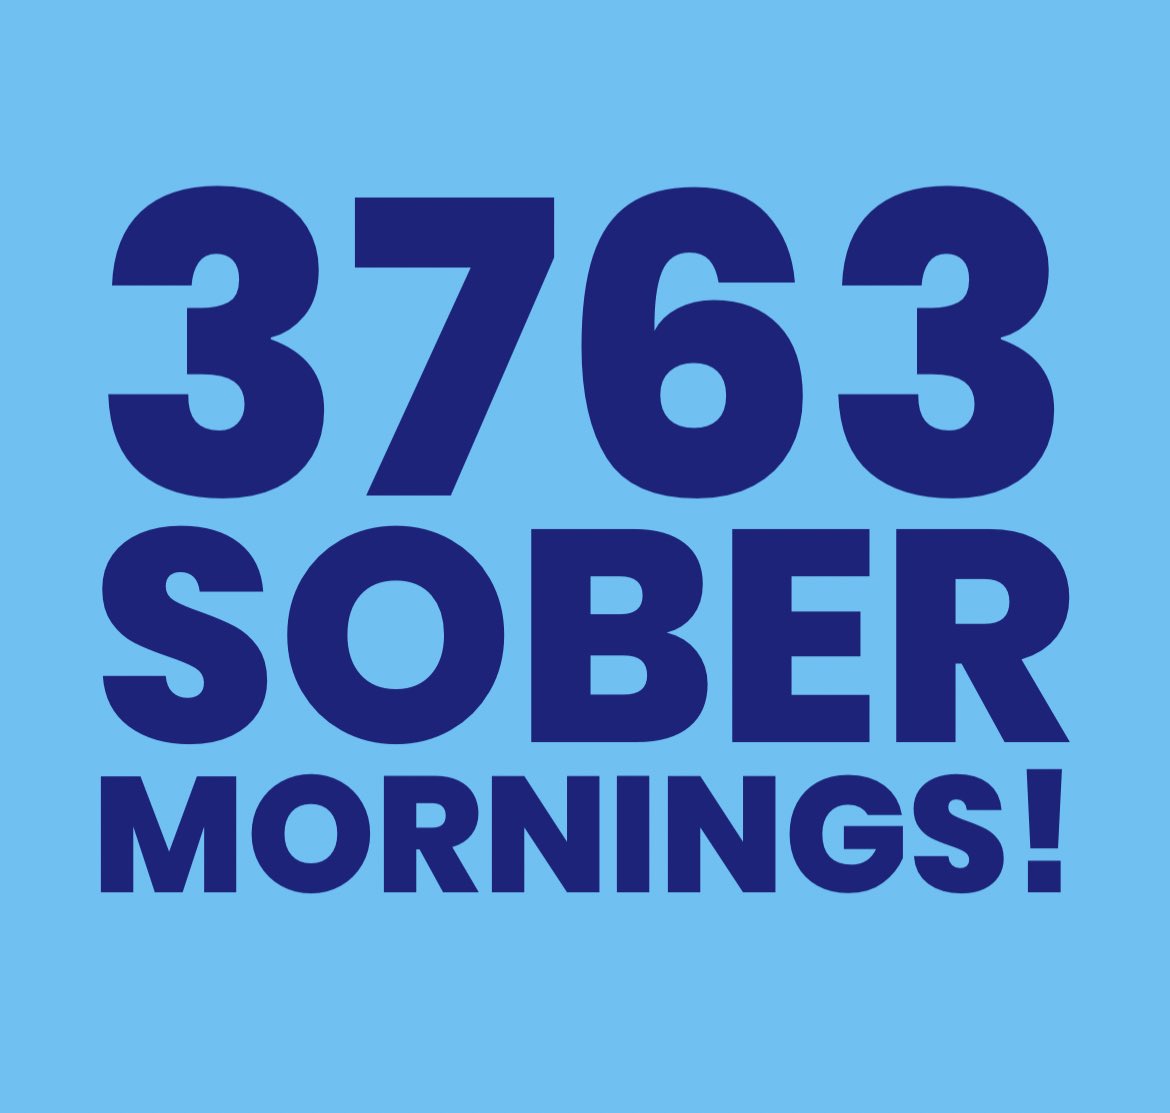 This morning I woke up sober for the 3763rd day in a row! 

It’s good to be sober! 

#sobrietyrocks #RecoveryPosse #sober  #addiction #alcoholism #wedorecover